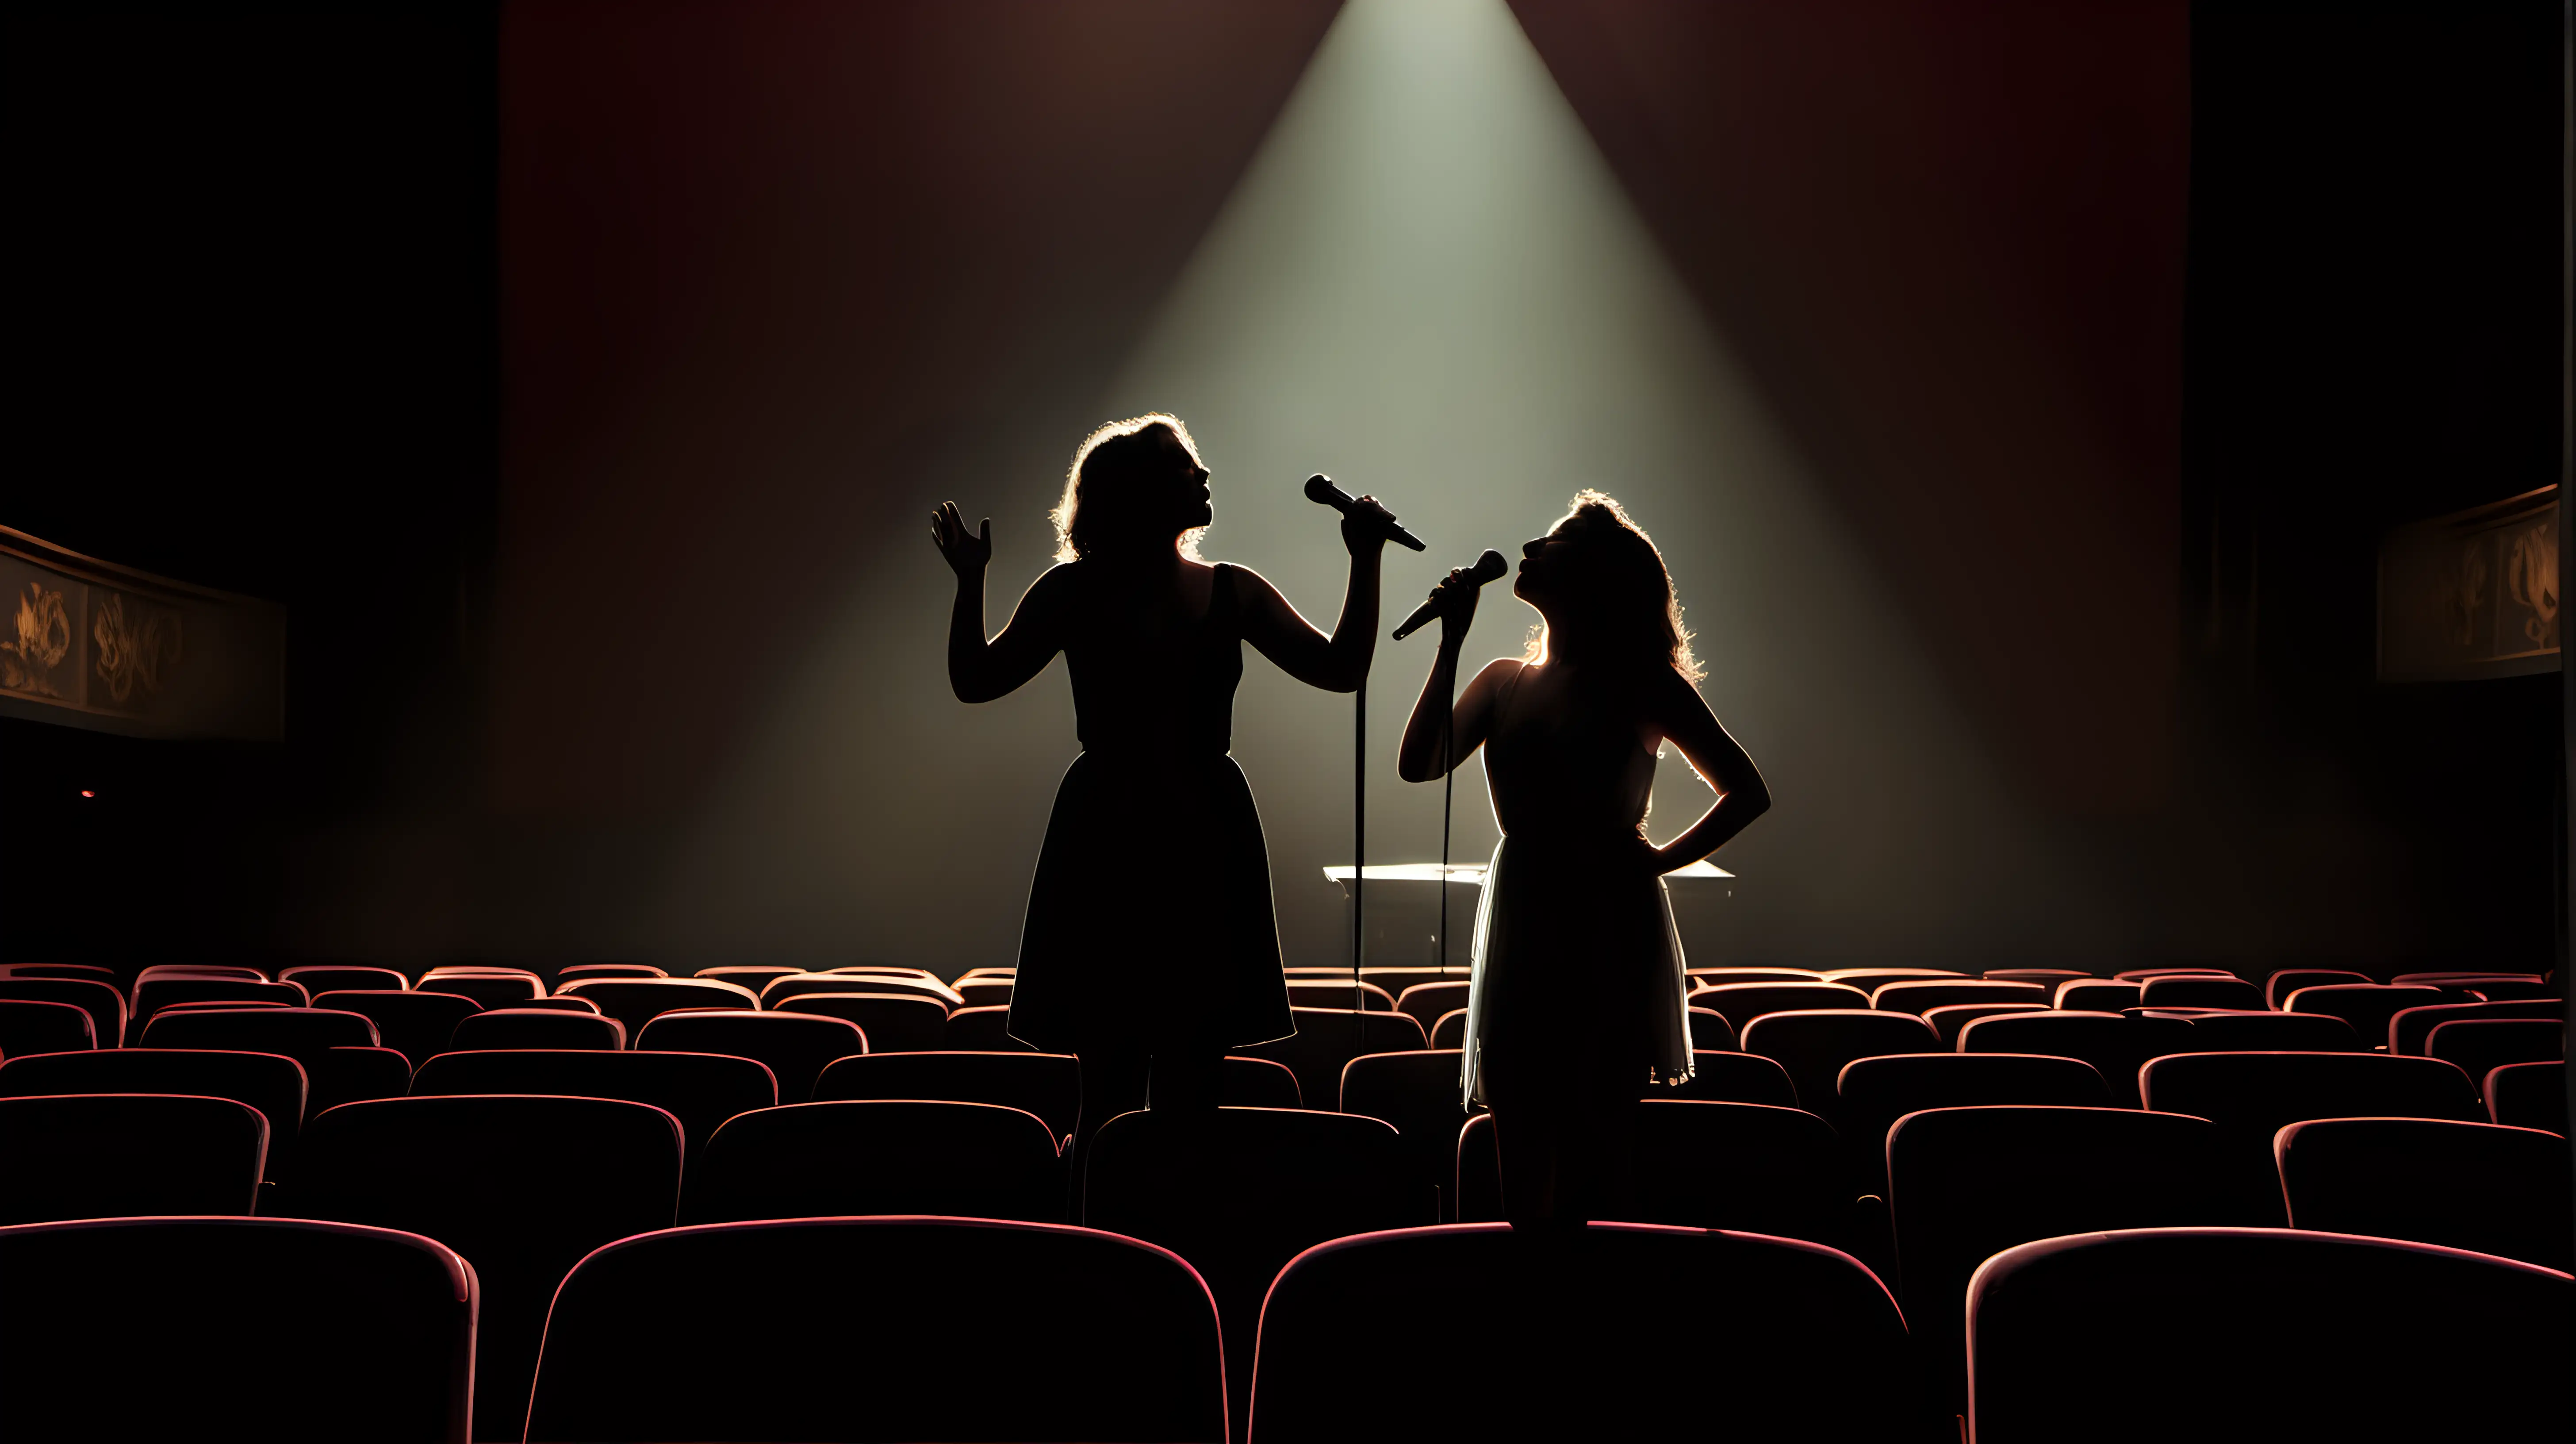 A singer stands center stage, bathed in soft light, their silhouette against the backdrop of empty theater seats, as they passionately belt out a heartfelt melody.
